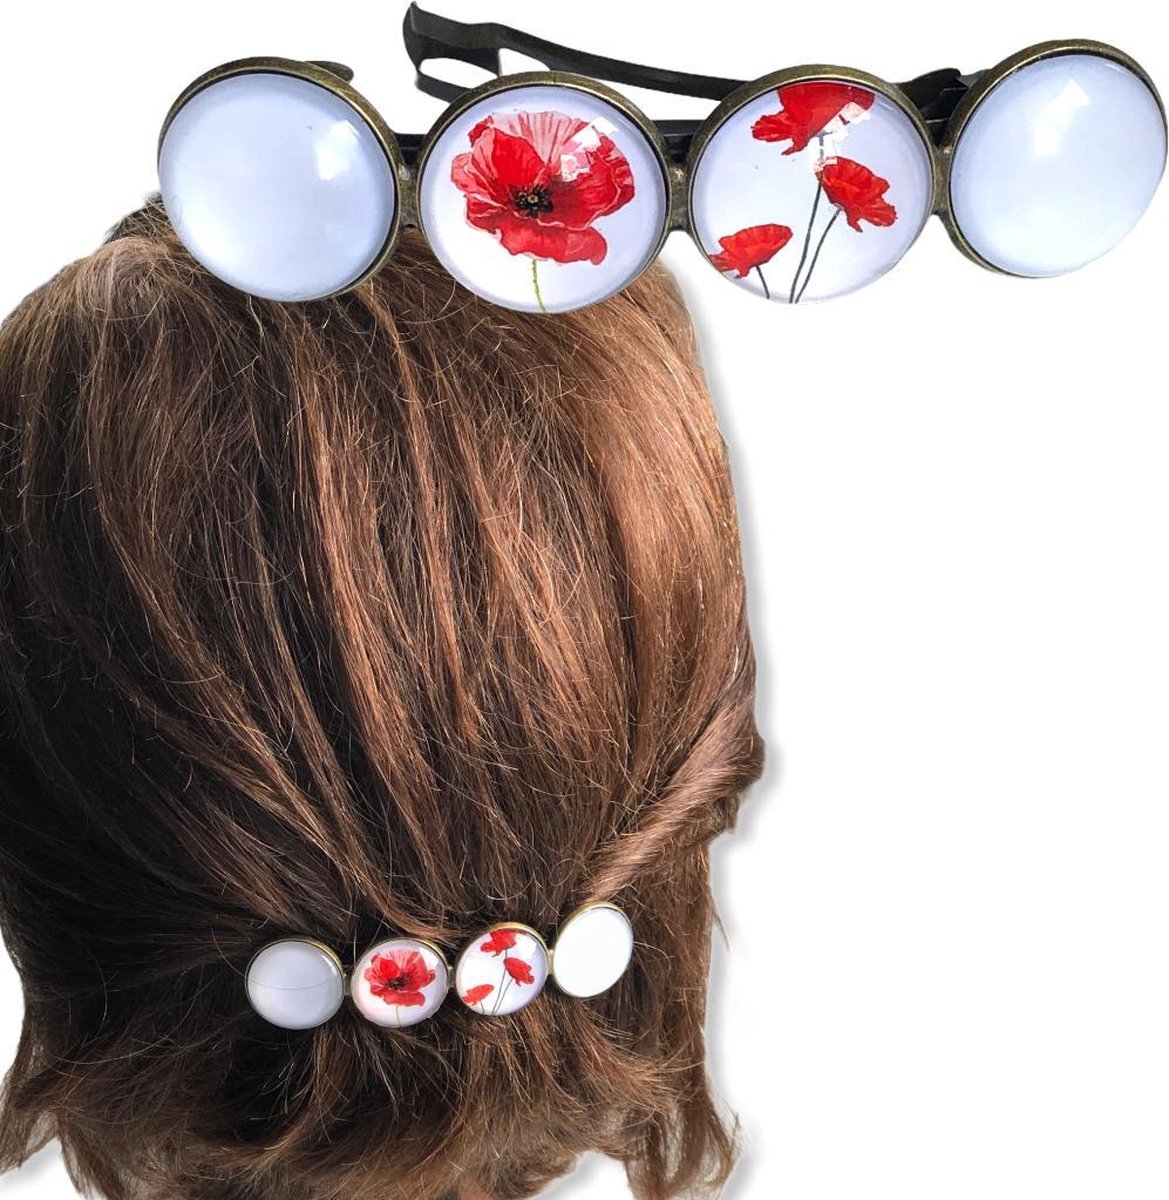 Hairpin-Color Hairclip XL glas cabochon haarspeld wit-rood-klaproos